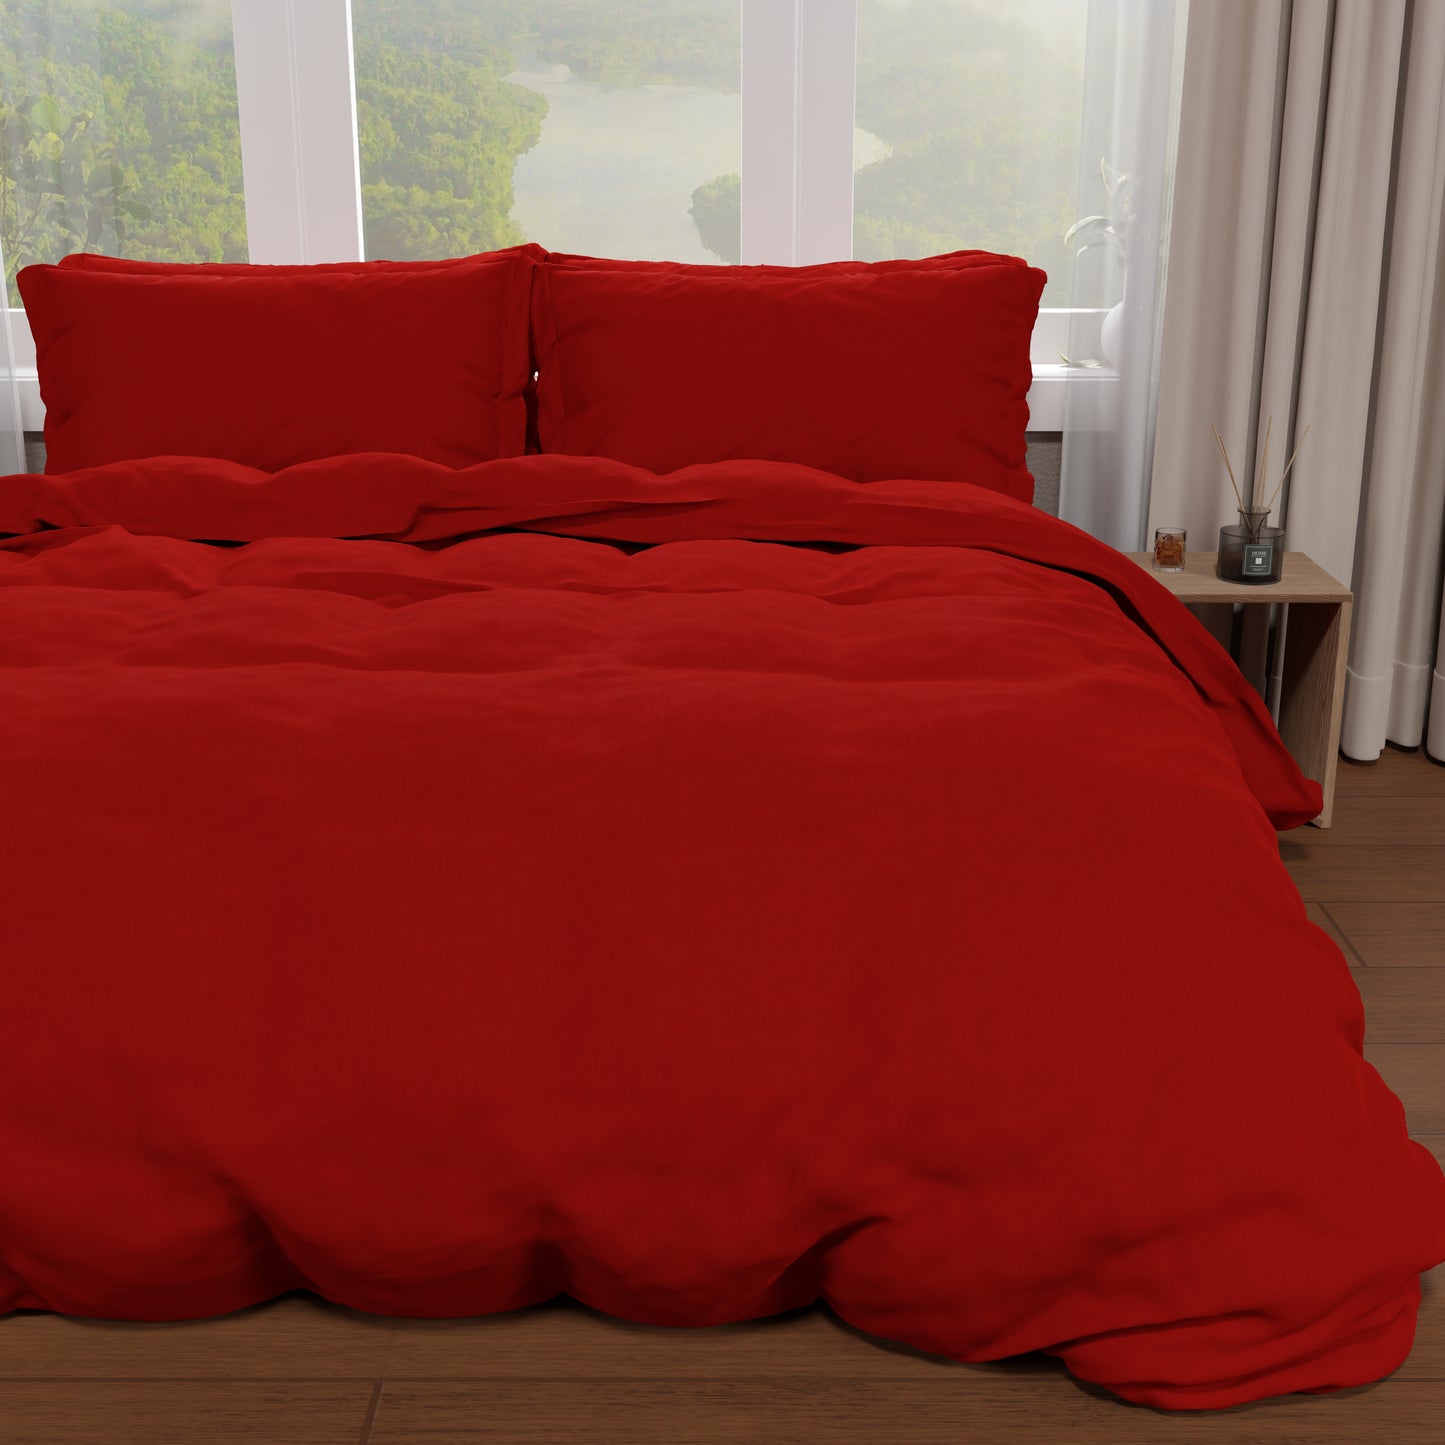 Double Duvet Cover, Duvet Cover and Pillowcases, Burgundy Solid Color